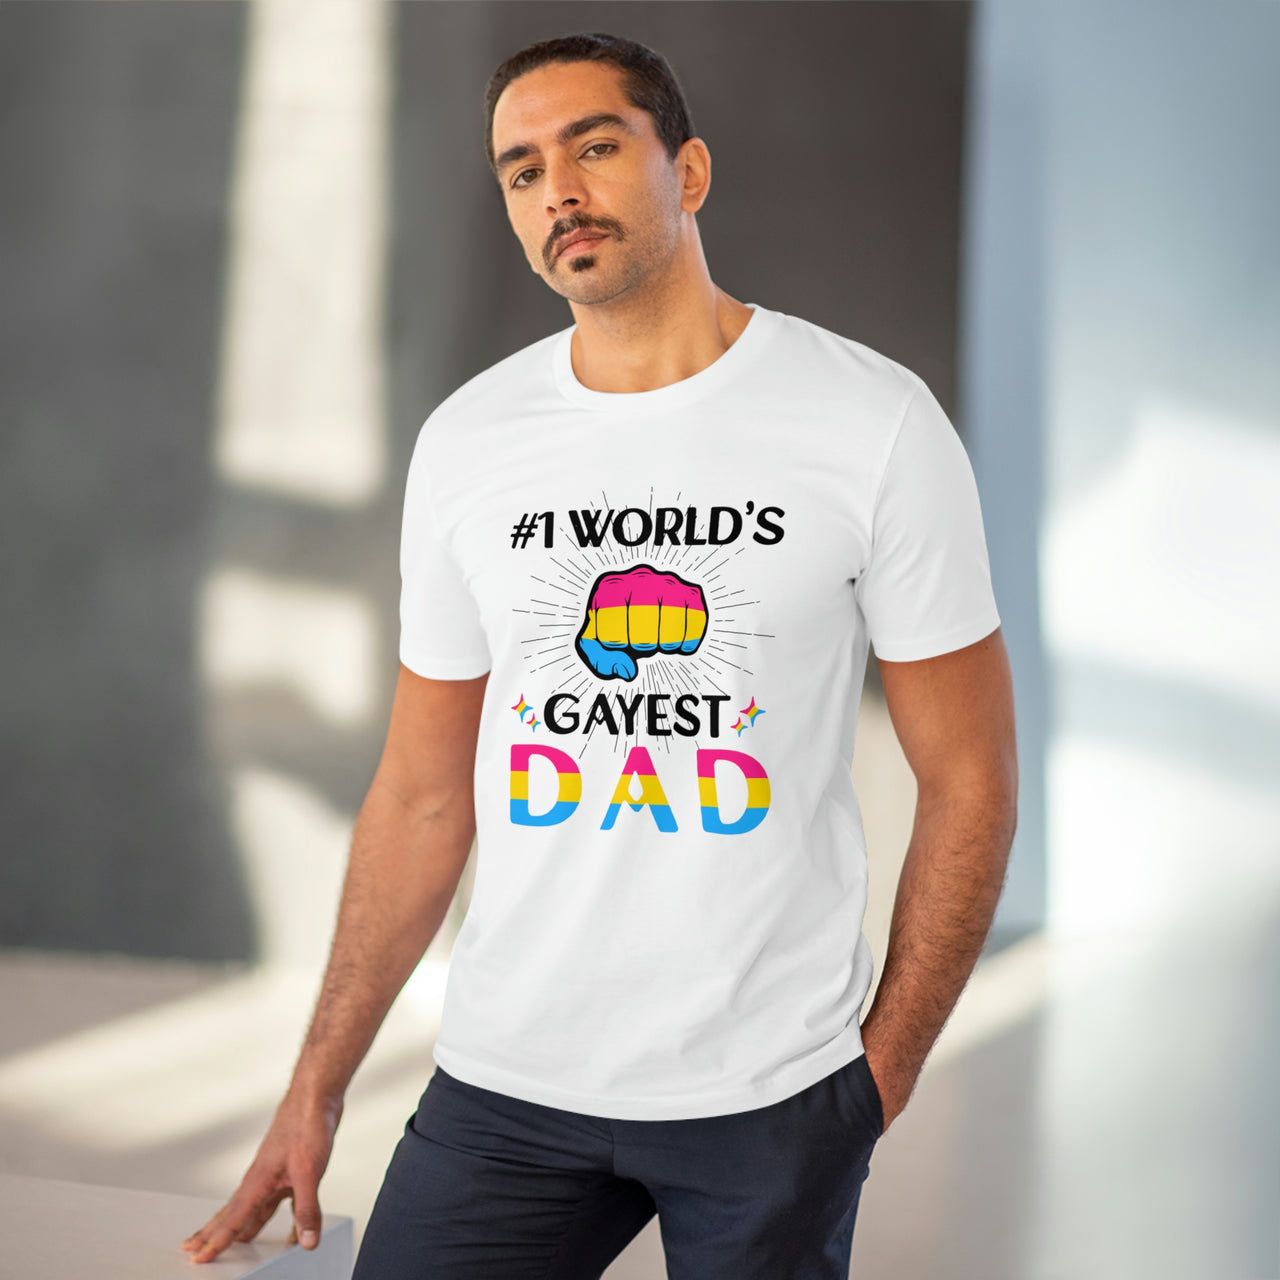 Pansexual Pride Flag T-shirt Unisex Size - #1 Word's Sexiest Dad Printify